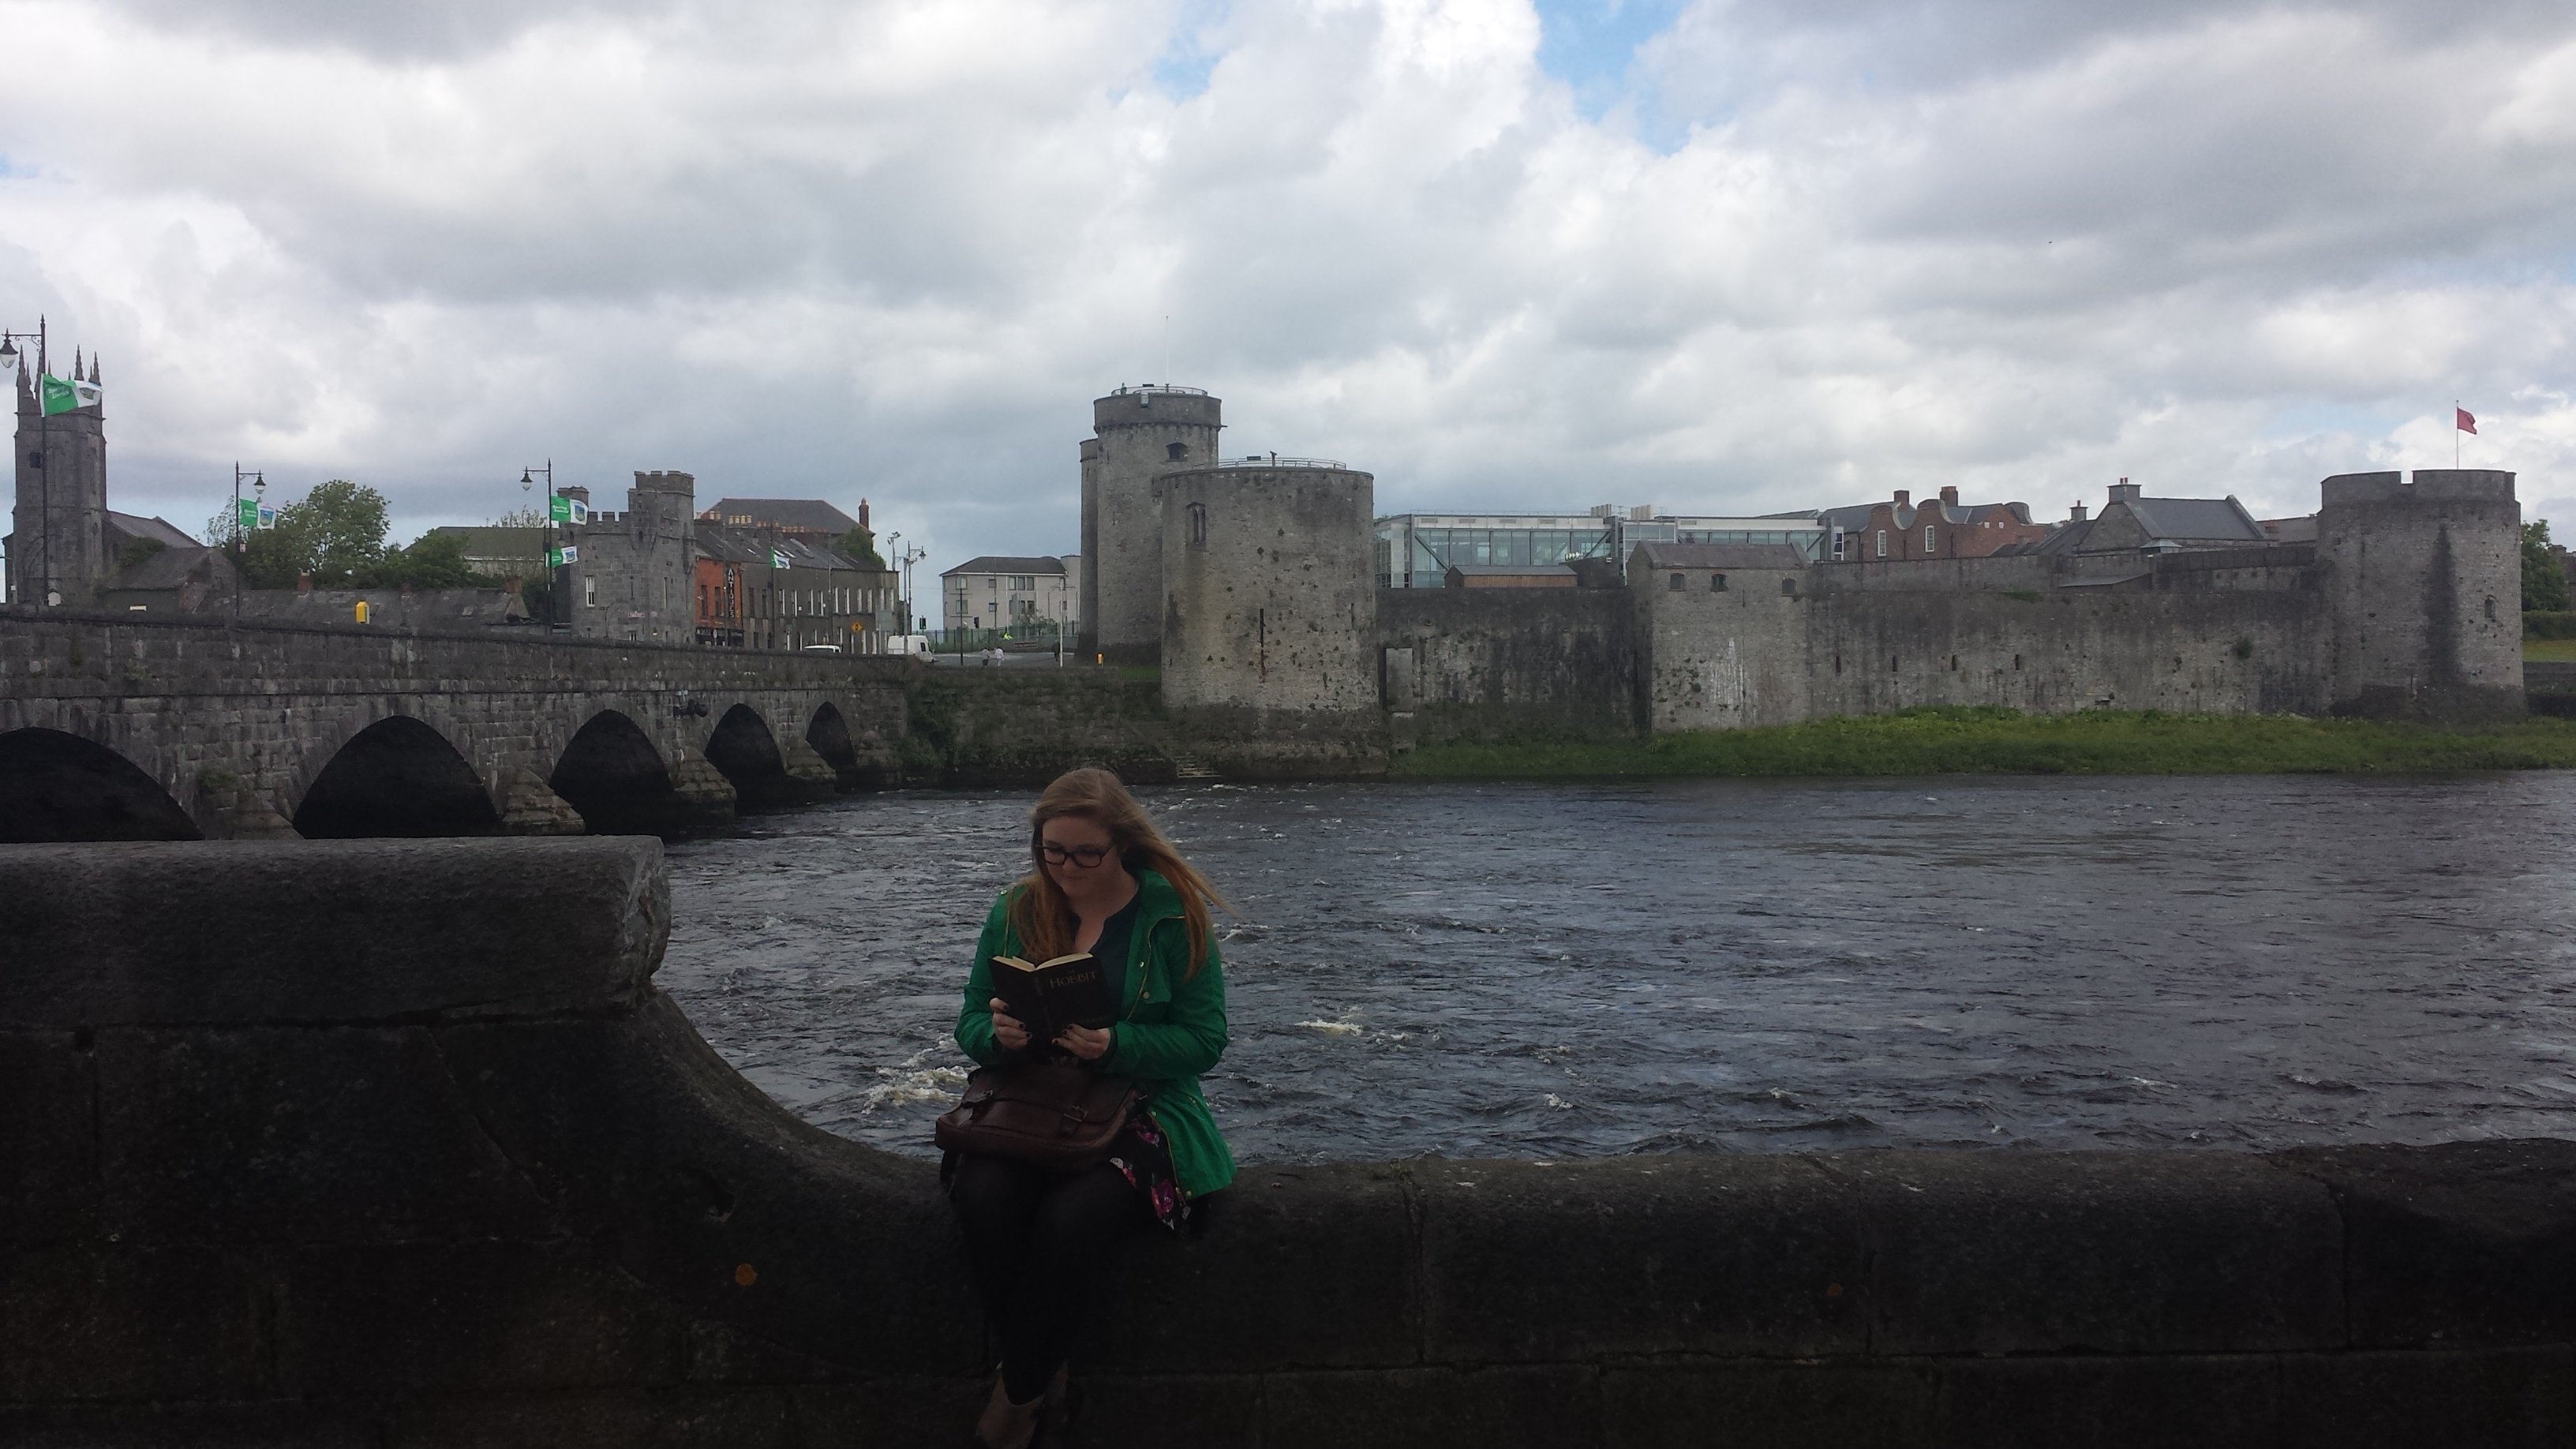 picture of King John's CAstle from the opposite side of the Shannon River. Bri sits on the ledge looking down at a book with the castle in the distance. The castle is more like stone walls with various towers.